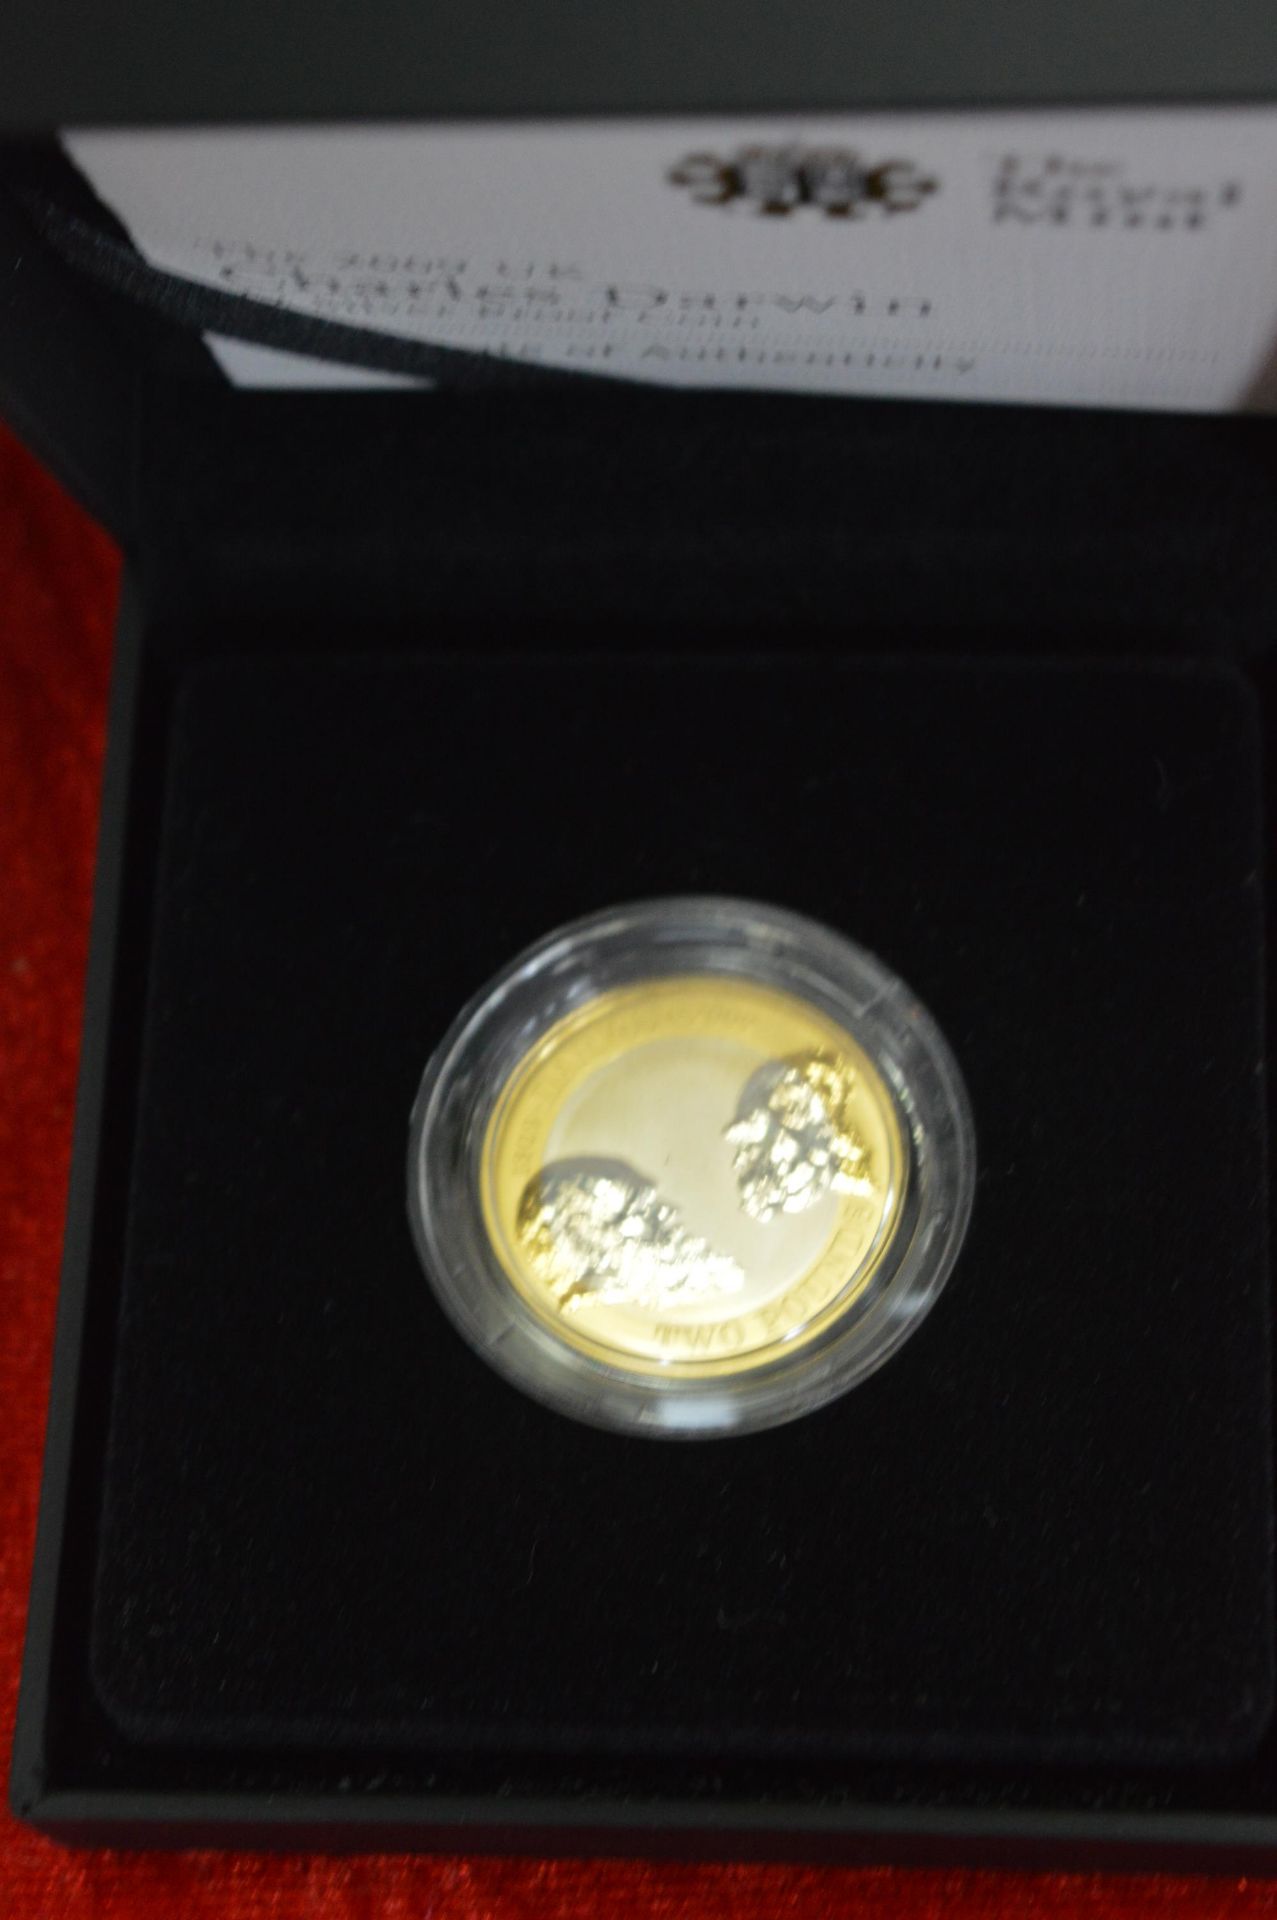 Royal Mint 2009 Charles Darwin Silver Proof £2 Coi